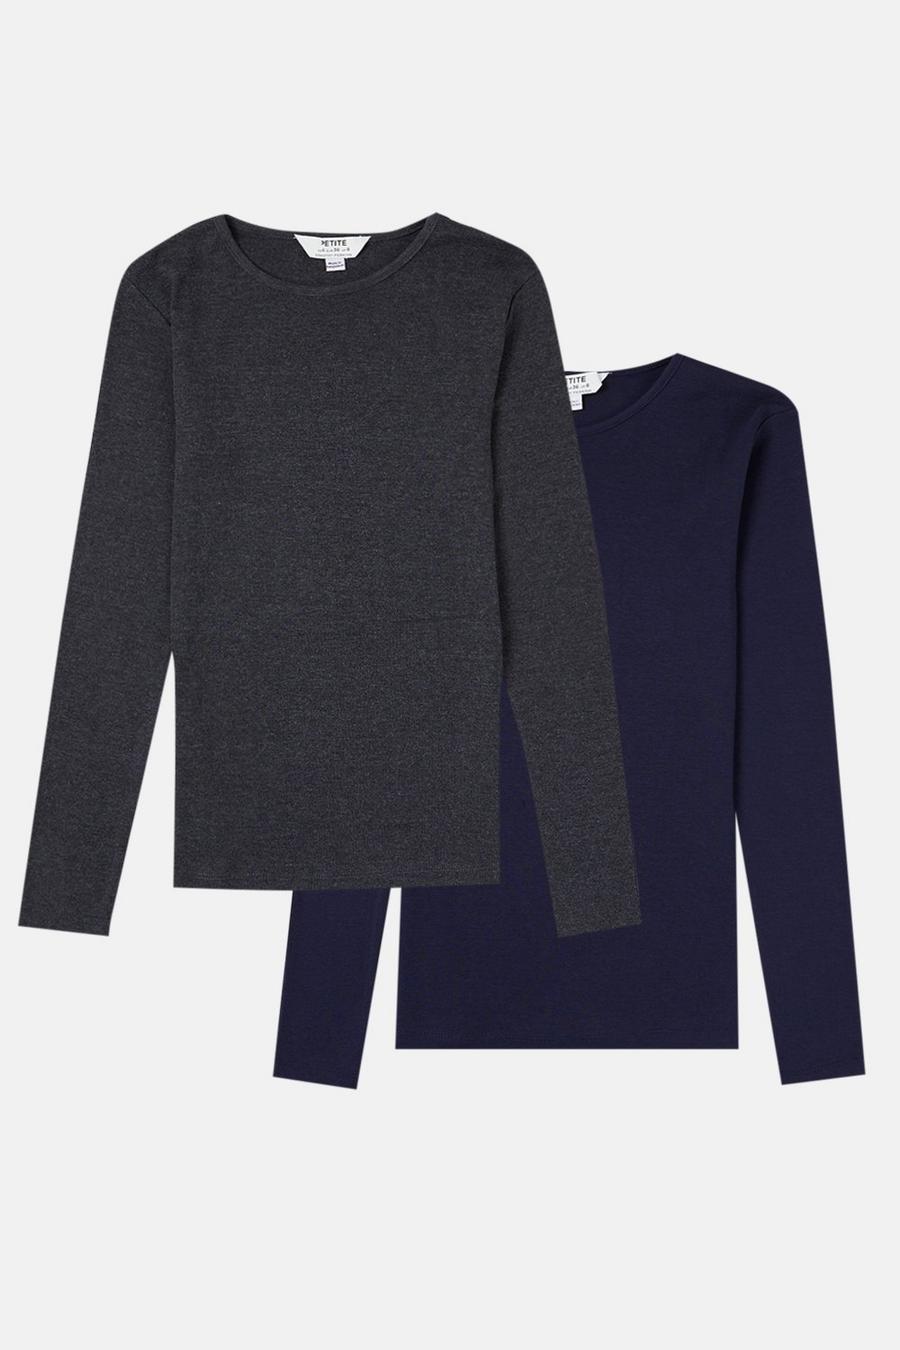 Petite 2pack Navy And Grey Long Sleeve Top